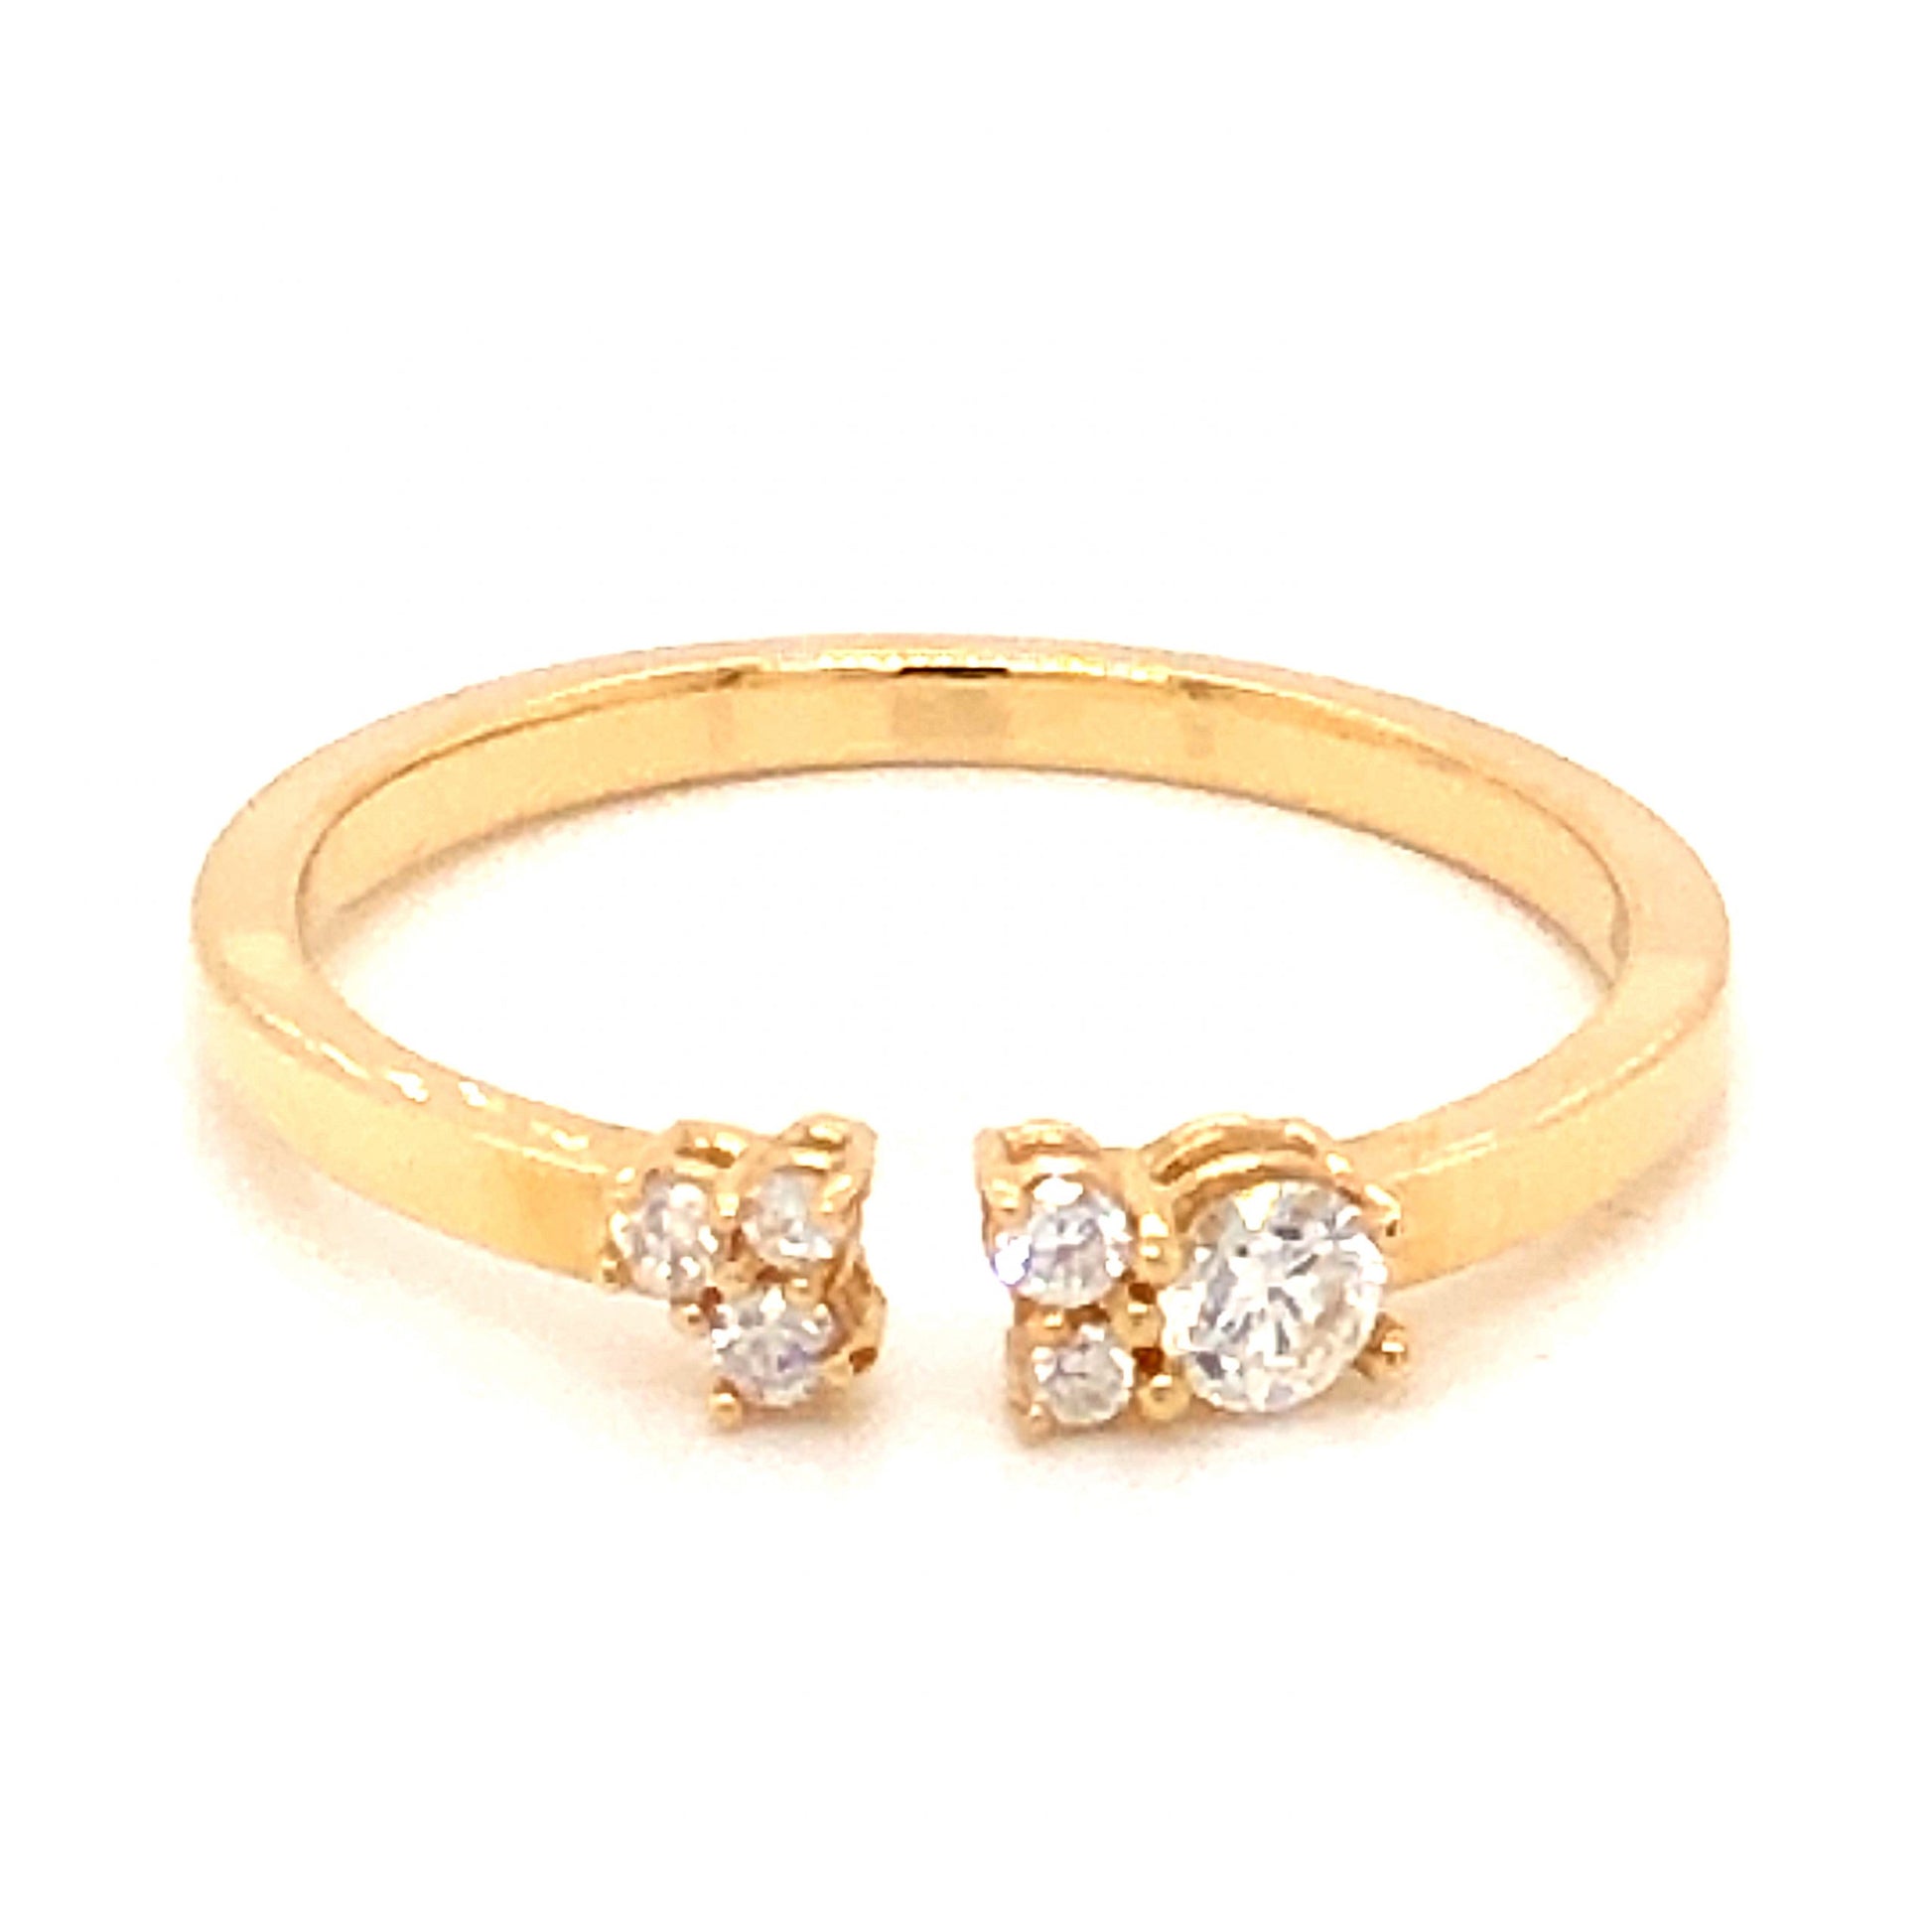 .18 Diamond Open Stacking Band in 14k Yellow GoldComposition: 14 Karat Yellow Gold Ring Size: 7 Total Diamond Weight: .175ct Total Gram Weight: 2.0 g Inscription: 14k
      